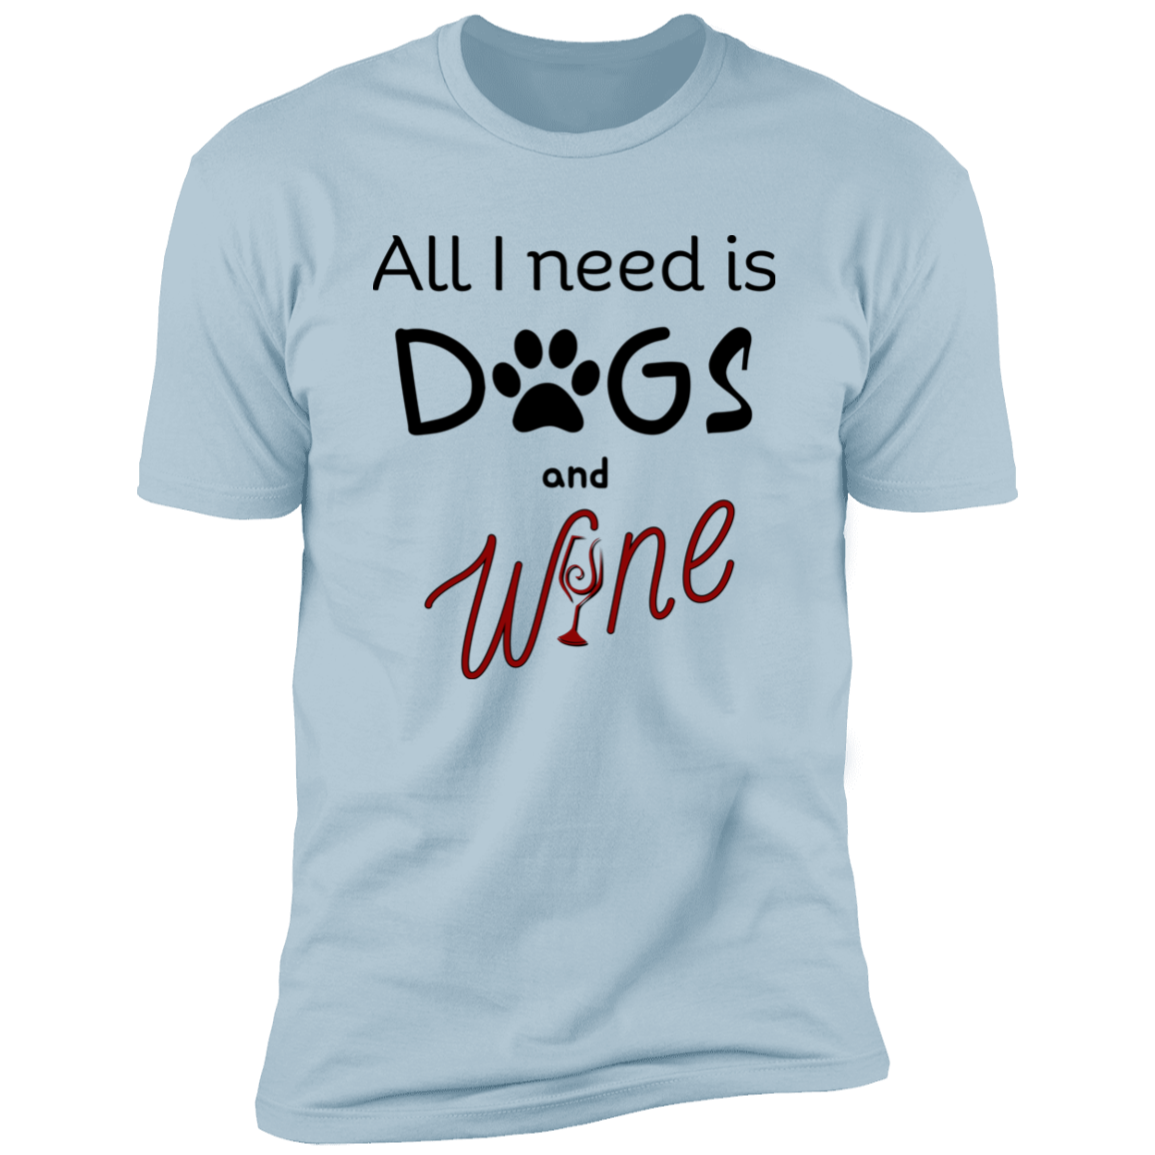 All I Need is Dogs and Wine T-shirt, Dog Shirt for humans, in light blue